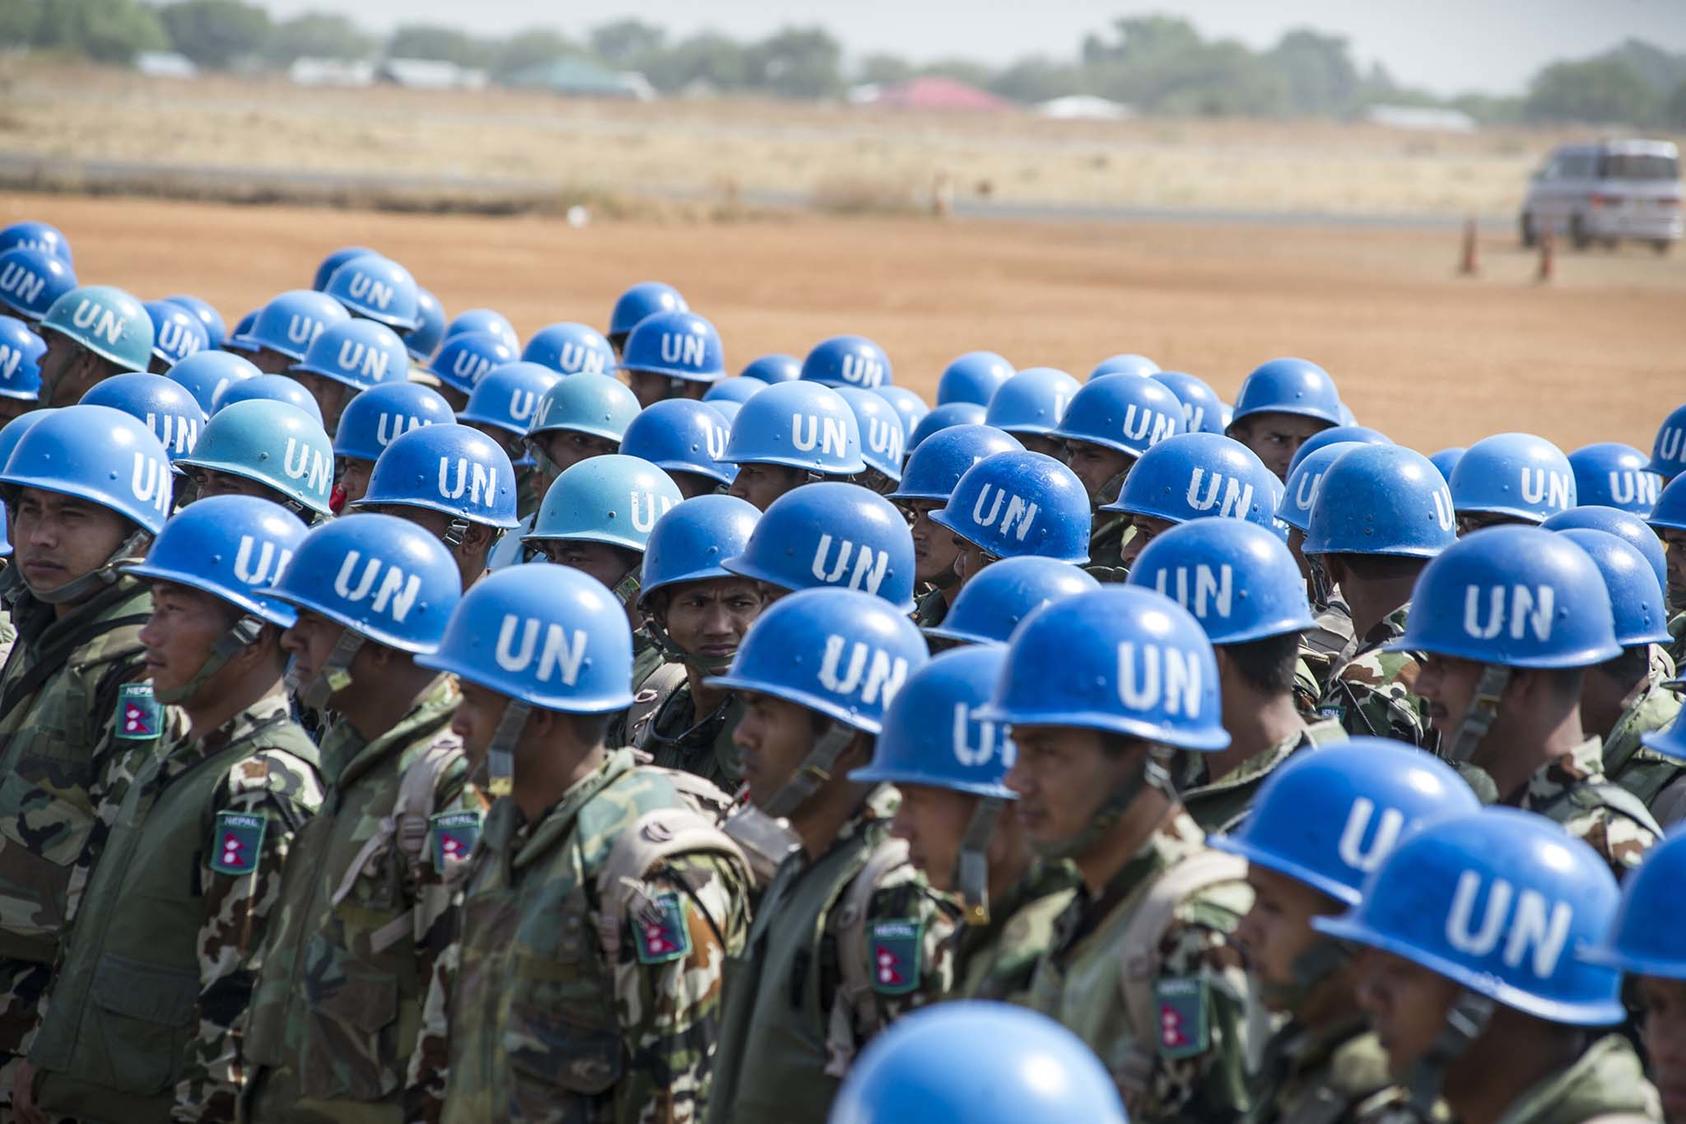 UNITED NATIONS PEACEKEEPING MISSIONS